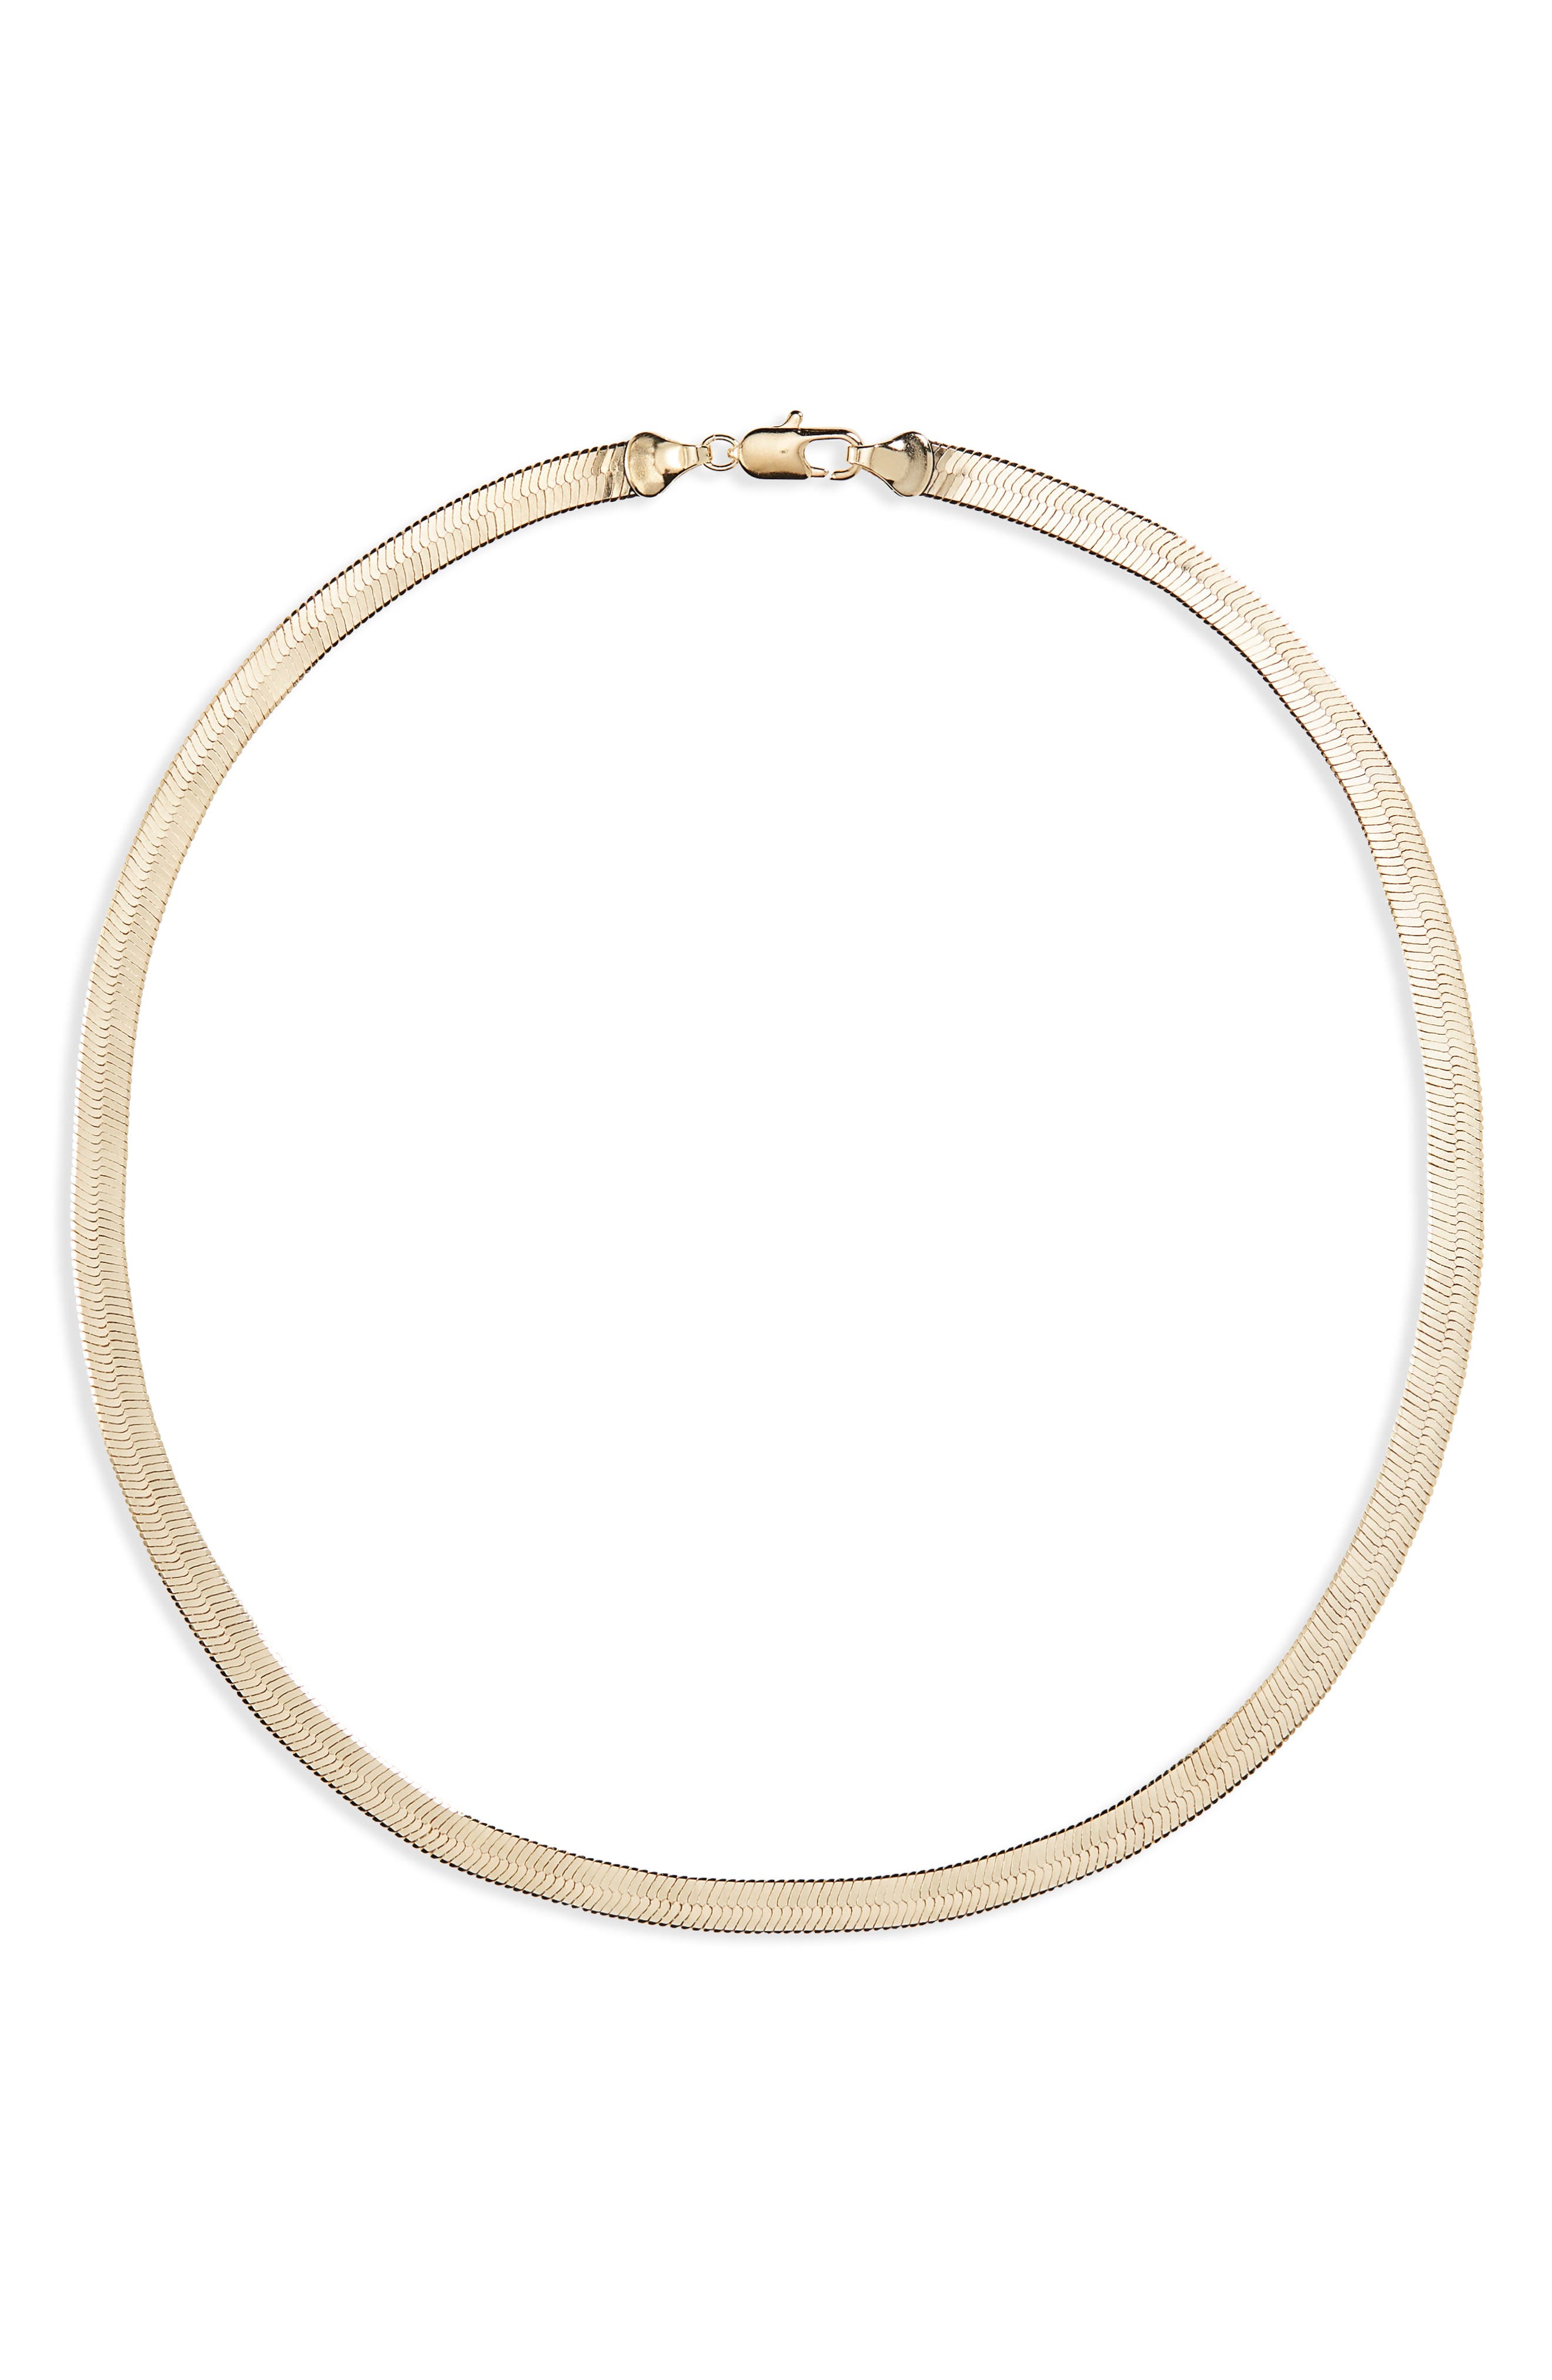 Laura Lombardi Omega Chain Necklace in Brass at Nordstrom, Size 18 Us